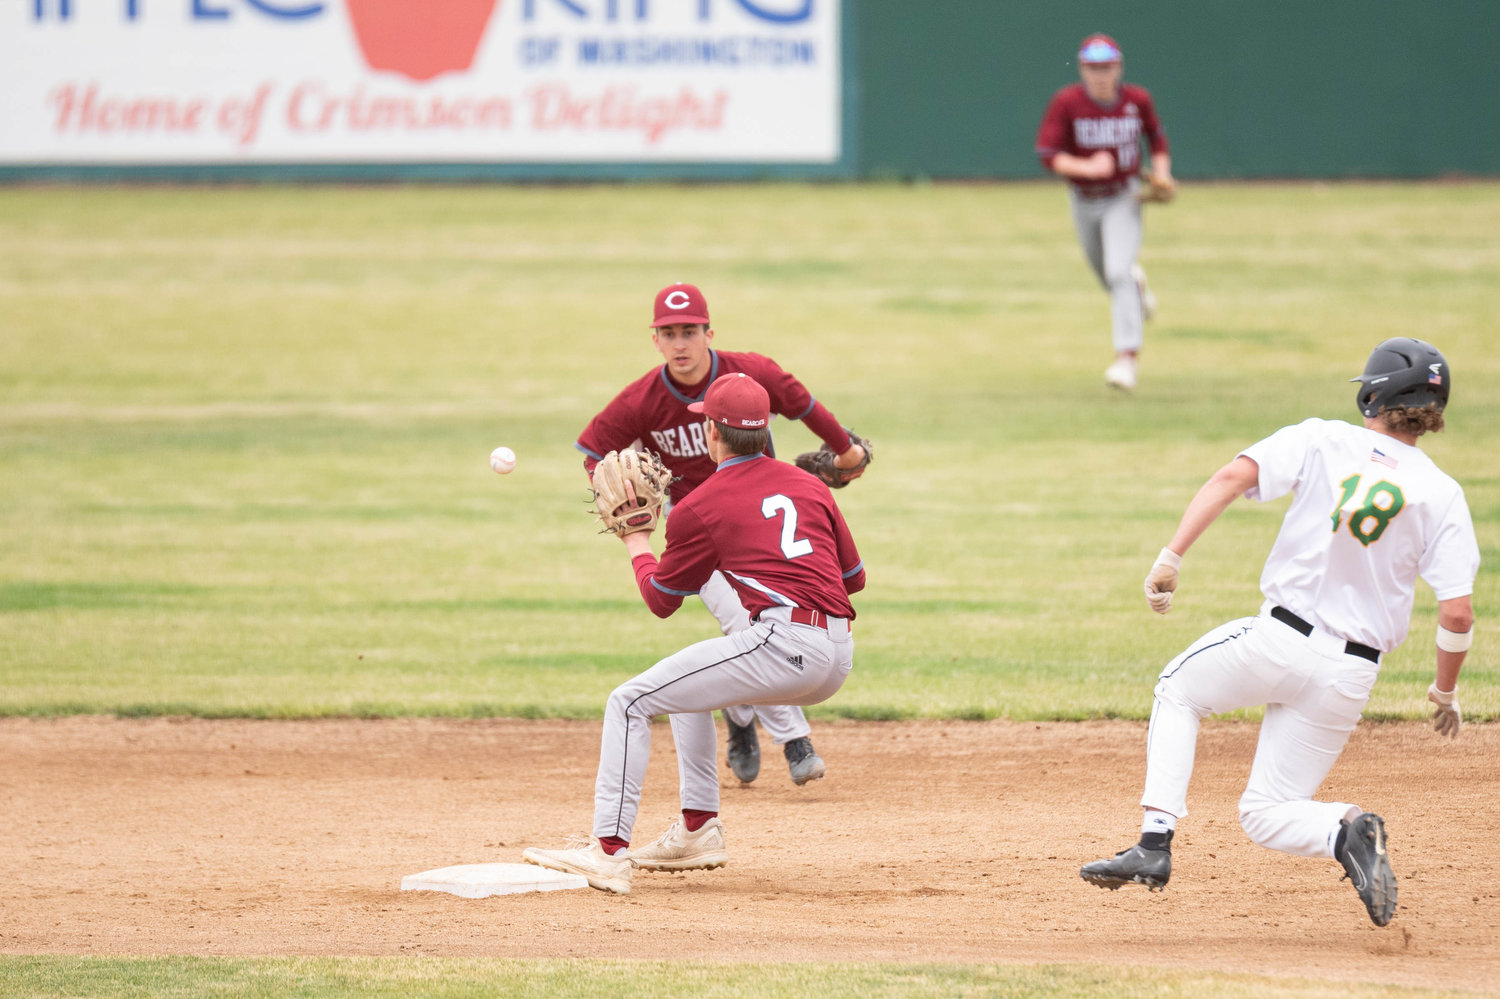 W.F. West shortstop Brock Bunker and second baseman Braden Jones (2) connect on an out while Tumwater's Jack Worgorm tries to slide into second in the 2A State Baseball Semifinals at Yakima County Stadium May 27.